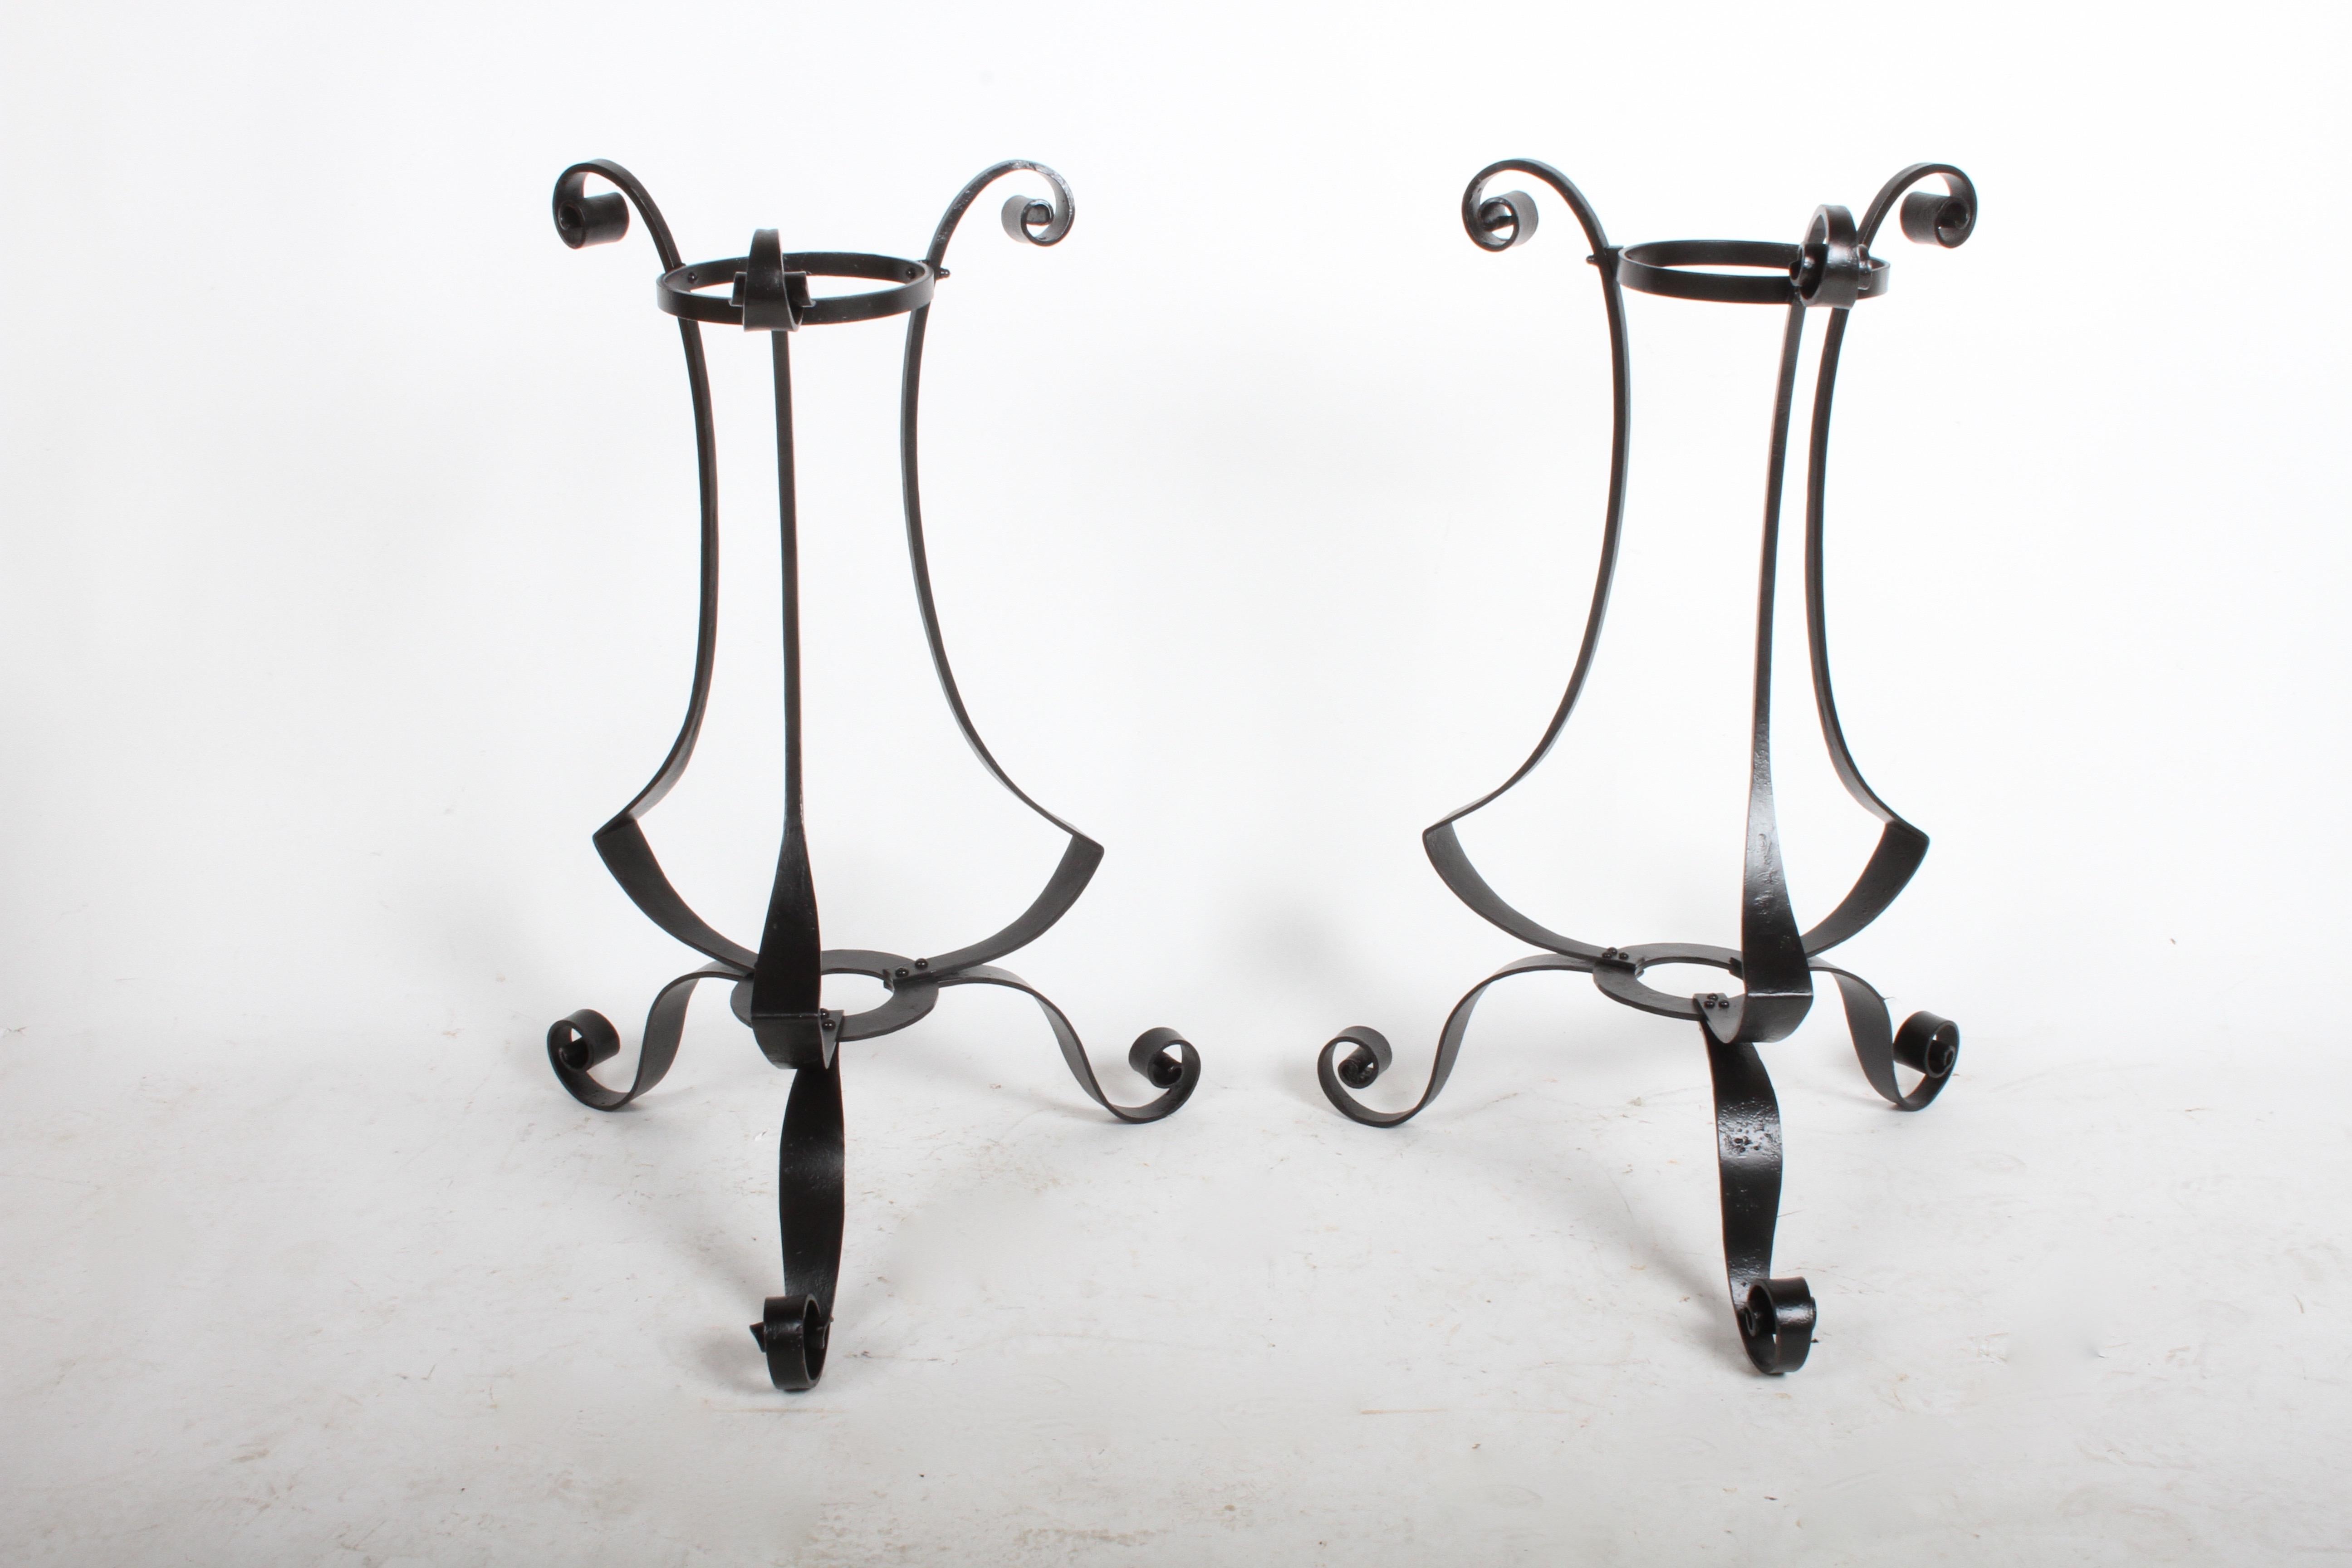 Nice pair of Arts & Crafts period hand forged scroll design wrought iron planters or plant stands. These have been sandblasted, dipped in rust primer, and painted satin black. Planters hold 8